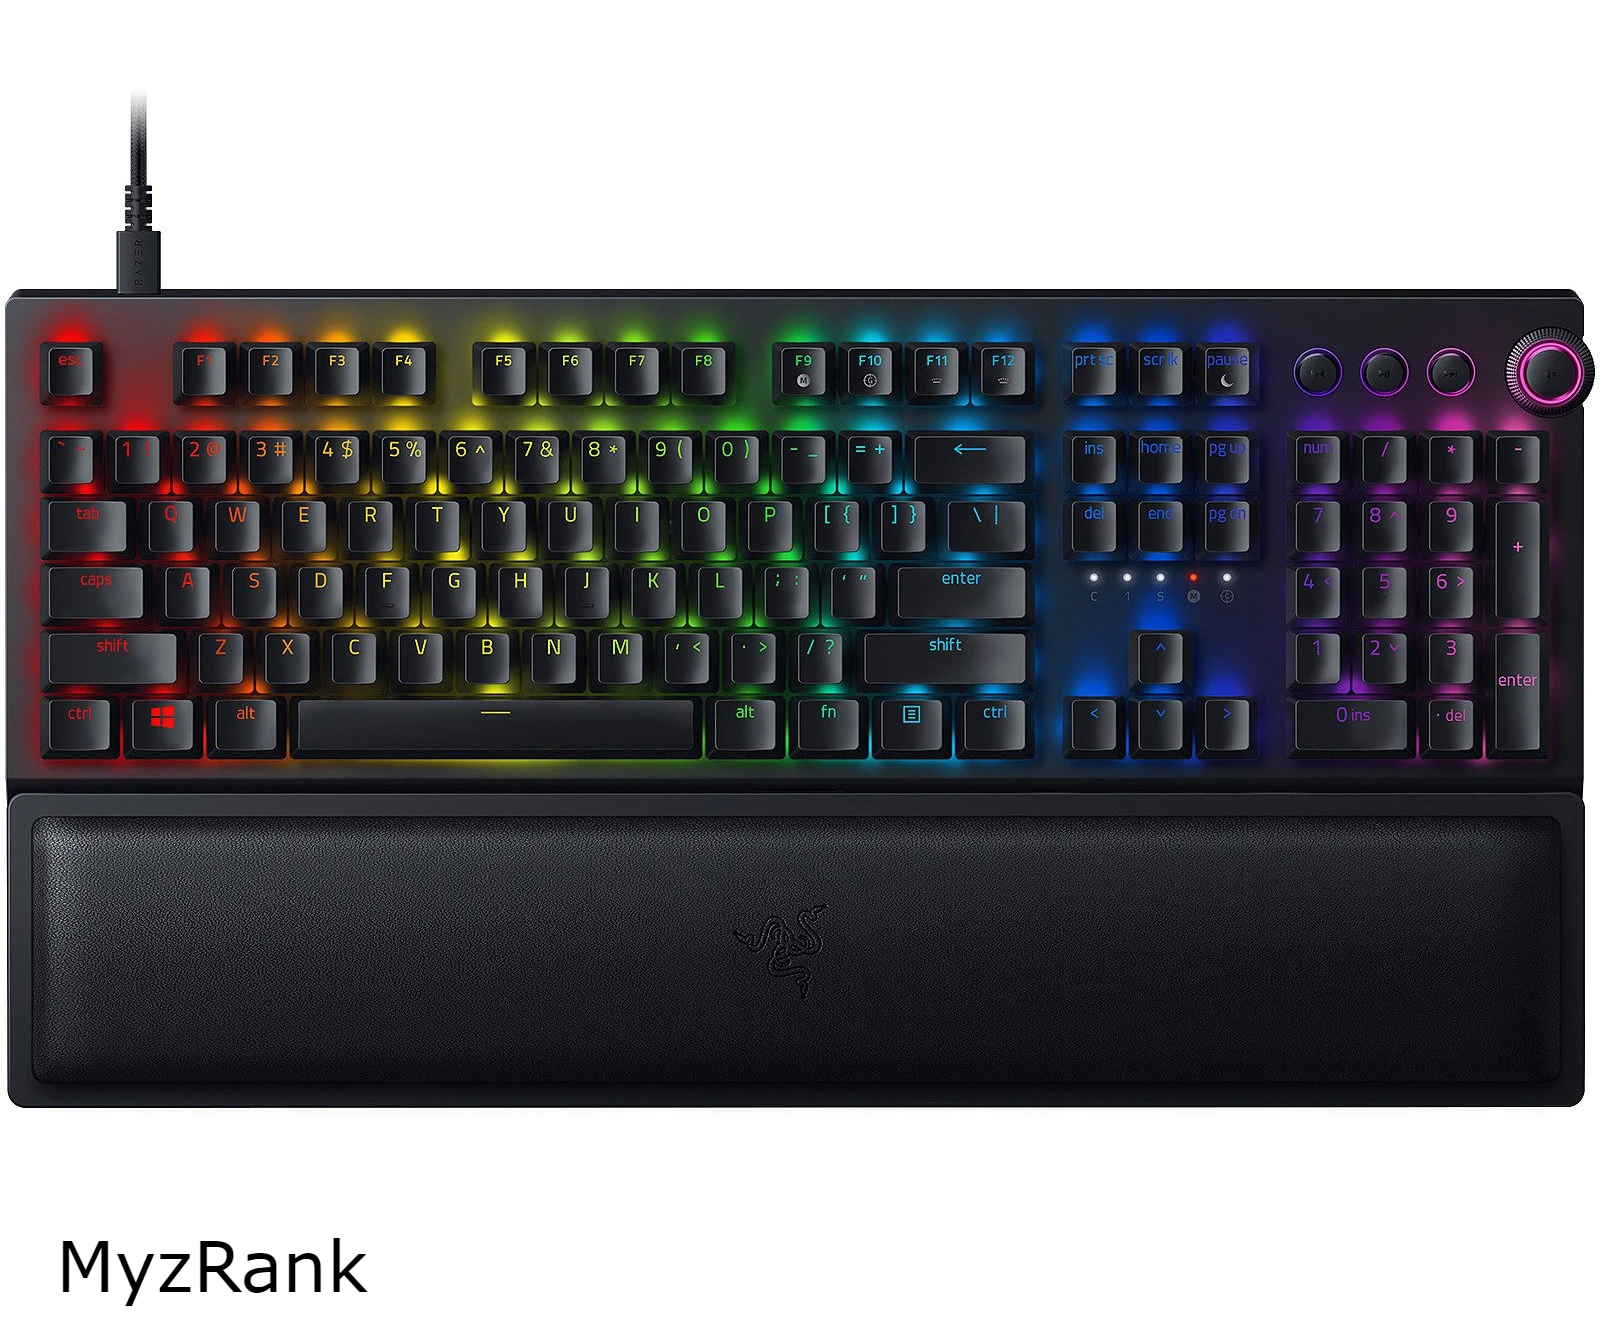 The best high-end gaming keyboard